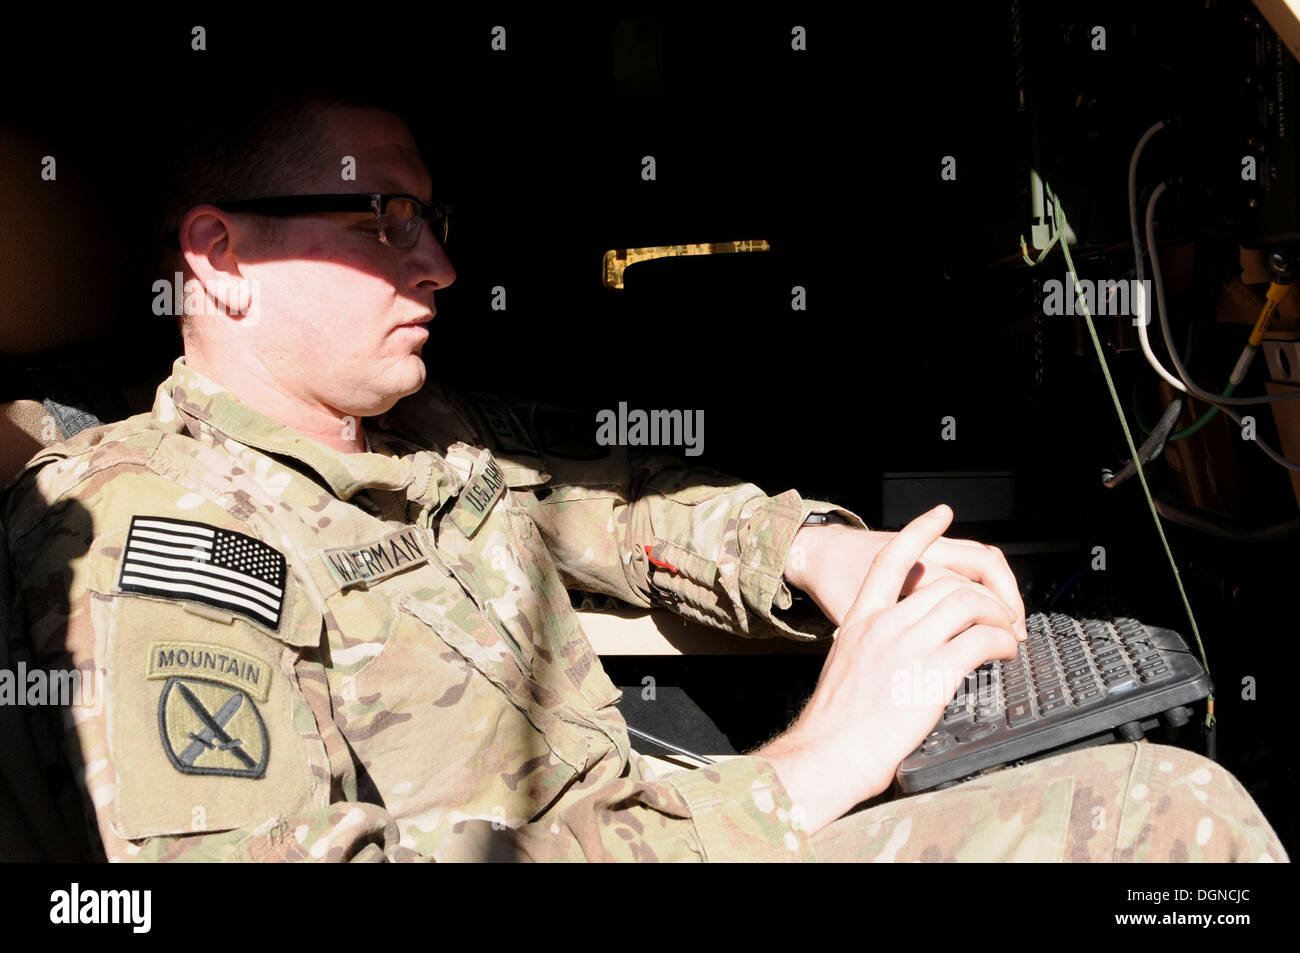 U.S. Army Capt. Charles Waterman takes a few moments to familiarize himself with the CS-13 system in a Point of Presence truck at Forward Operating Base Tagab Oct. 17, 2013. Waterman is a Newport, Wash., native, who serves as the Security Force Advise and Stock Photo